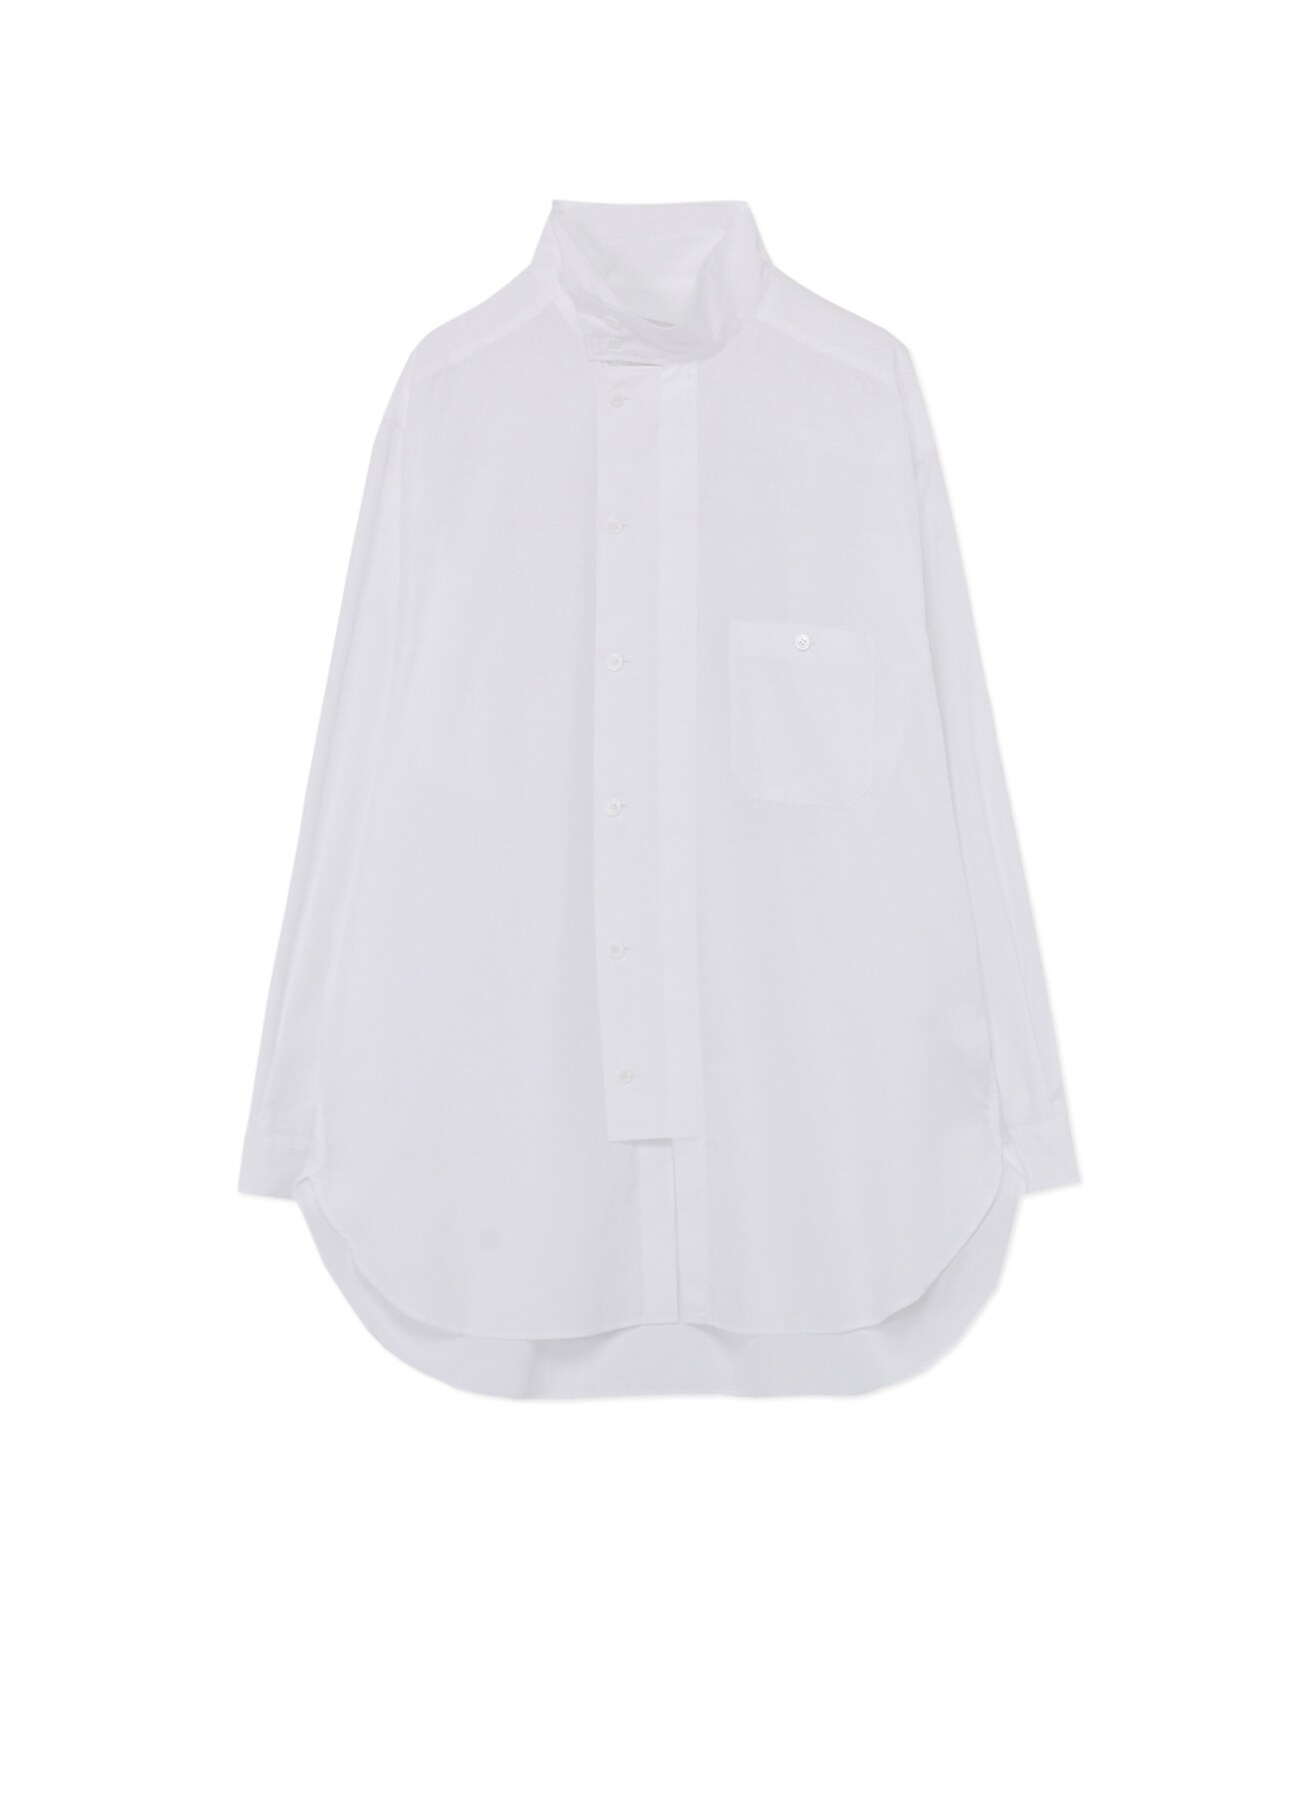 COTTON BROAD CLOTH STAND COLLAR SHIRT WITH DESIGN PLACKET